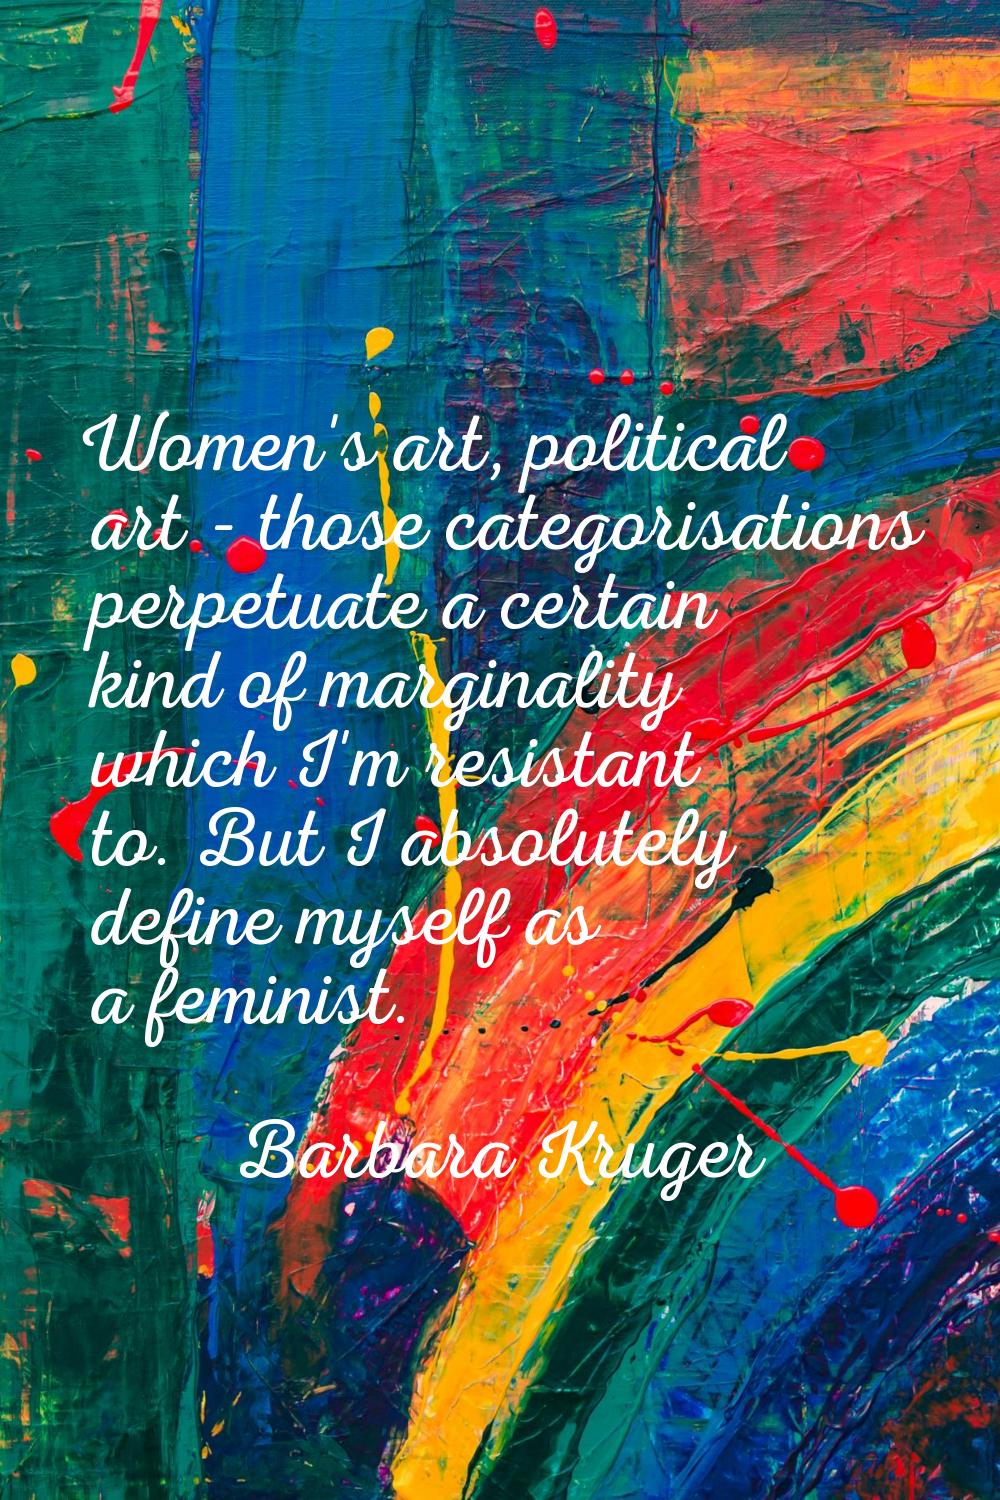 Women's art, political art - those categorisations perpetuate a certain kind of marginality which I